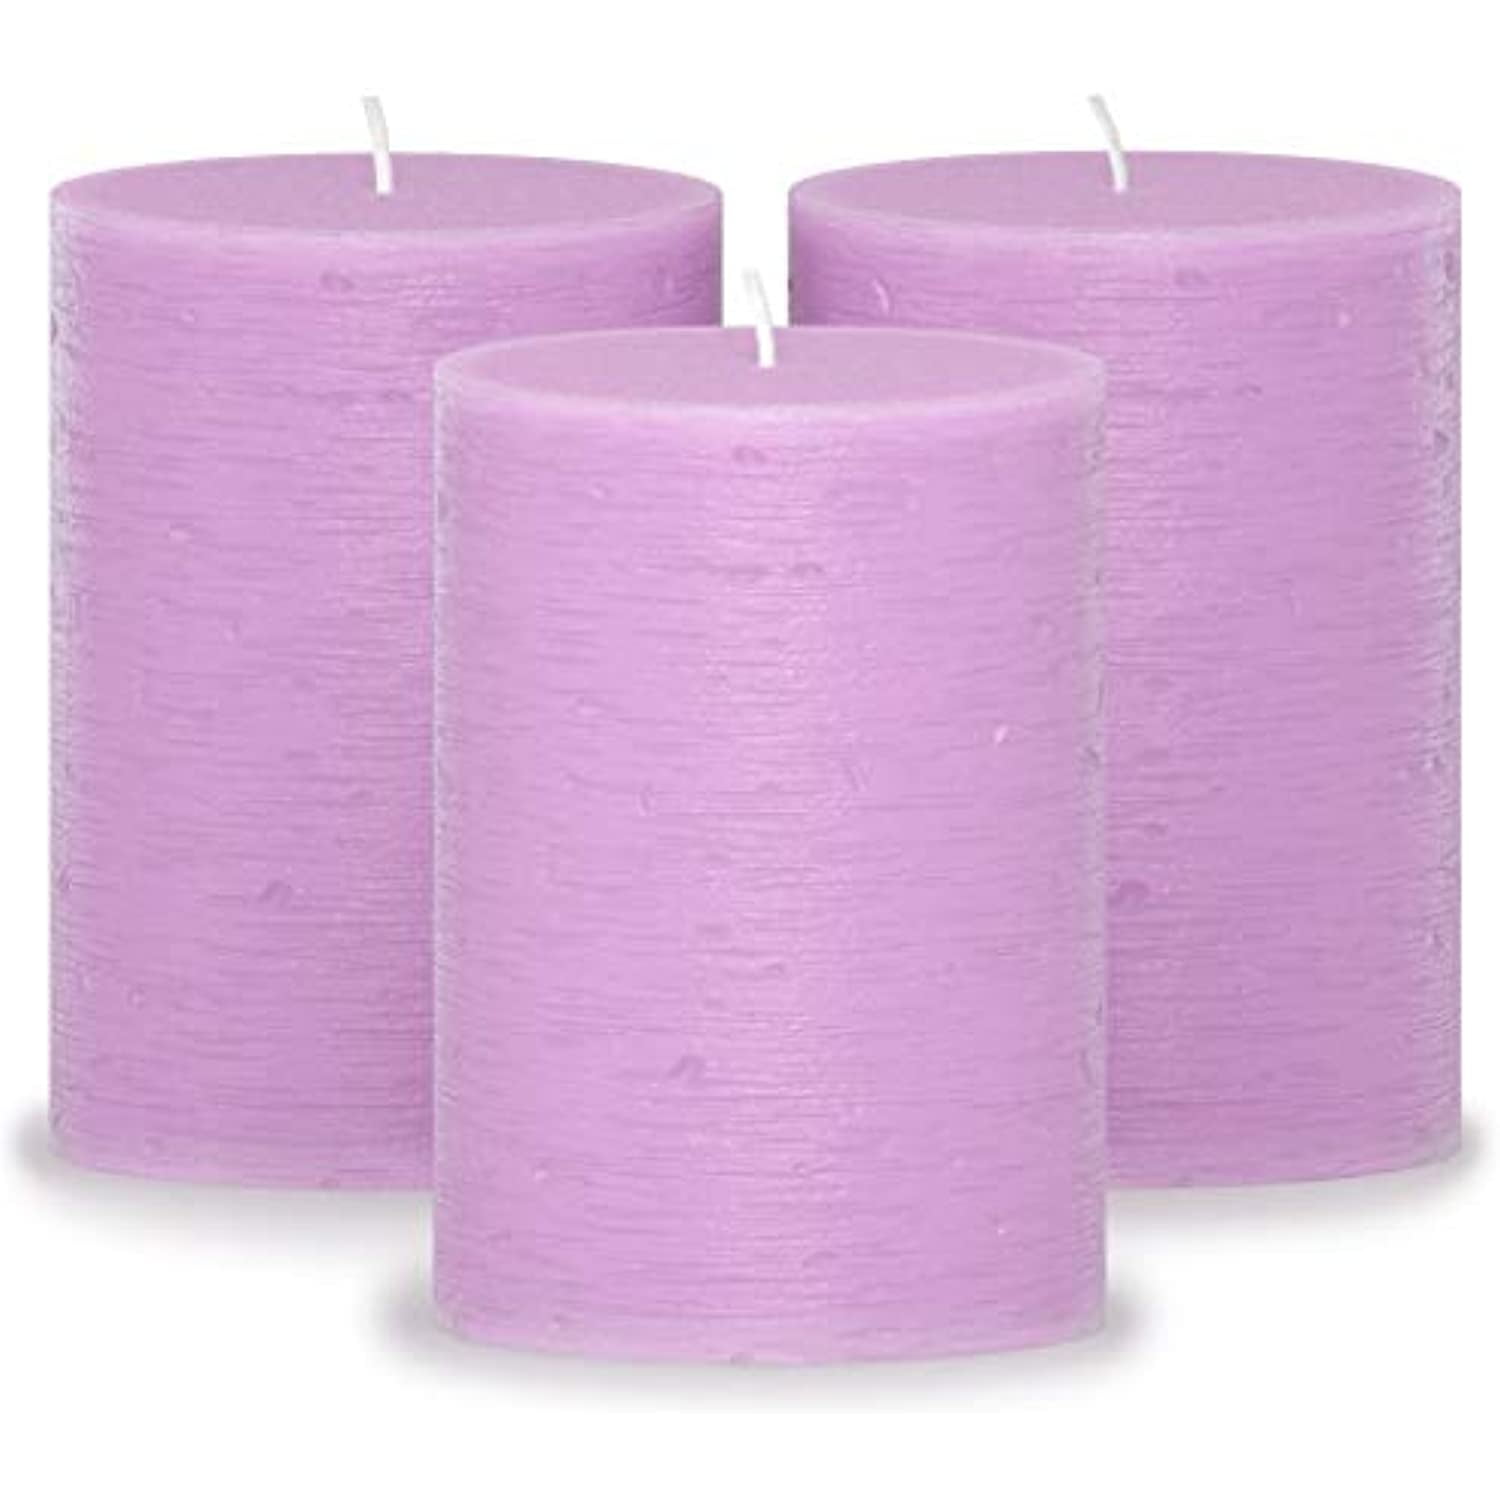 CANDWAX 3x6 Pillar Candles Set of 3 Decorative Unscented No Drip Light Turquoise 